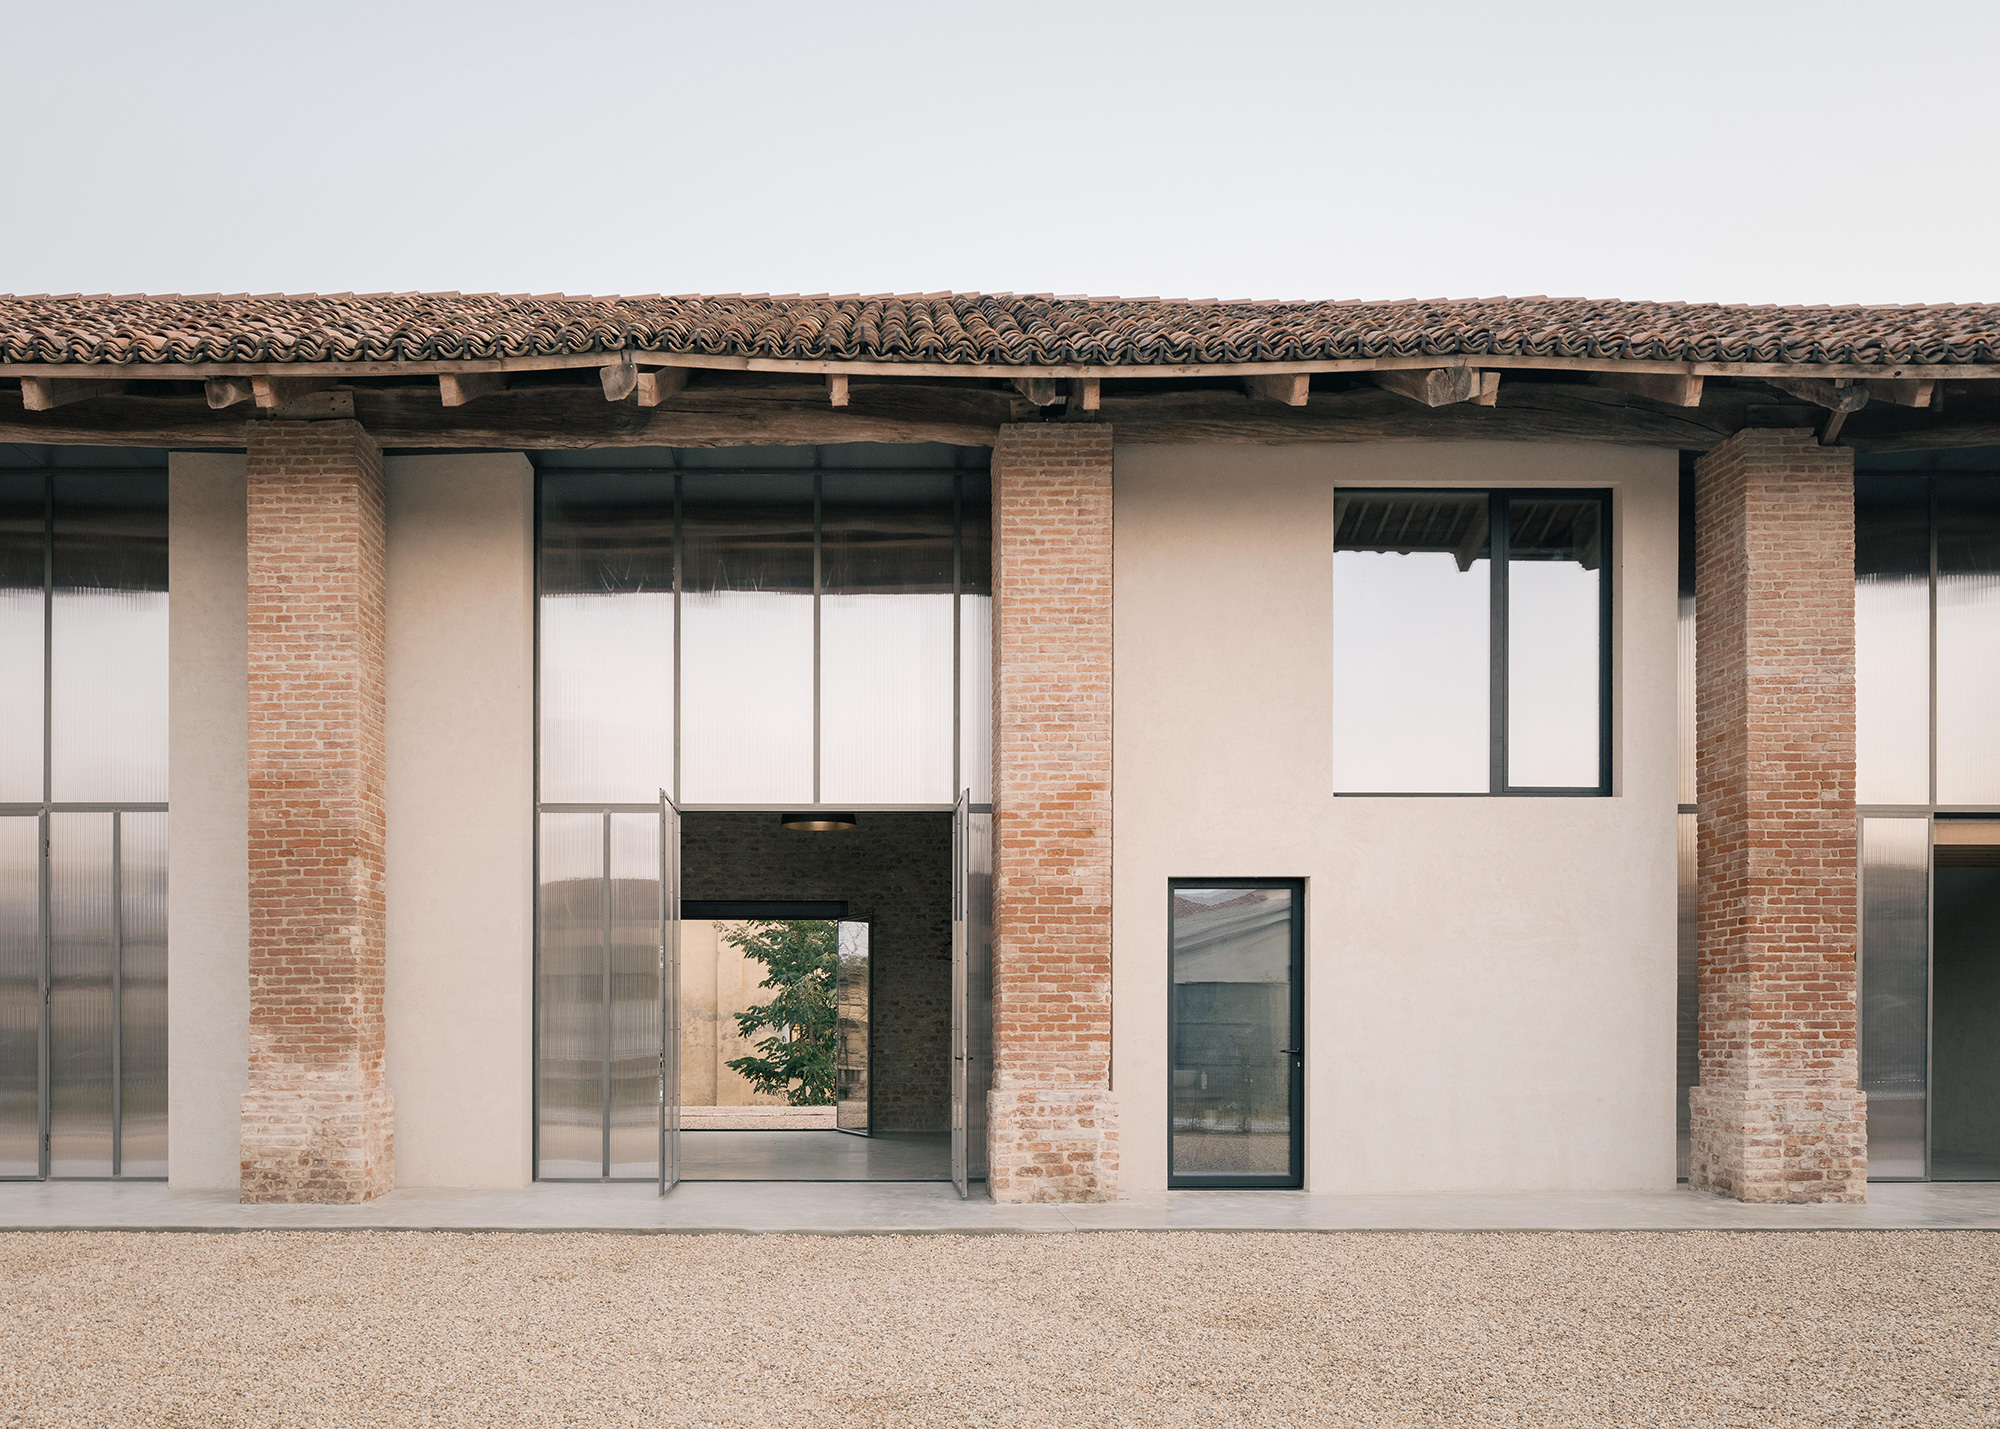 We Rural Country House - Gessato